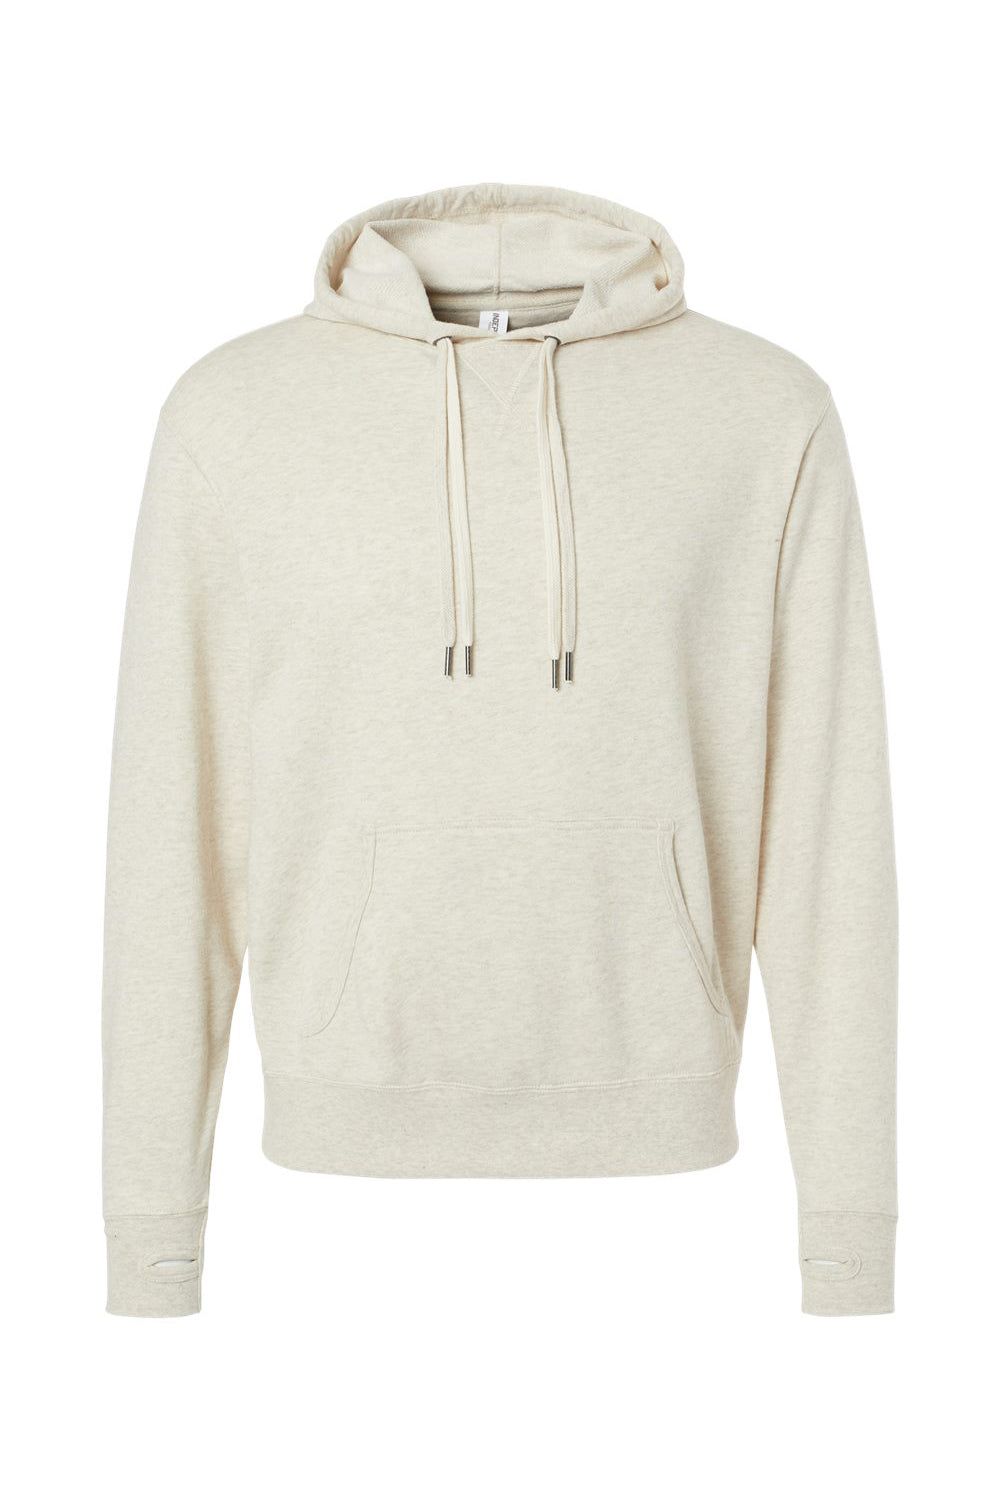 Independent Trading Co. PRM90HT Mens French Terry Hooded Sweatshirt Hoodie Heather Oatmeal Flat Front